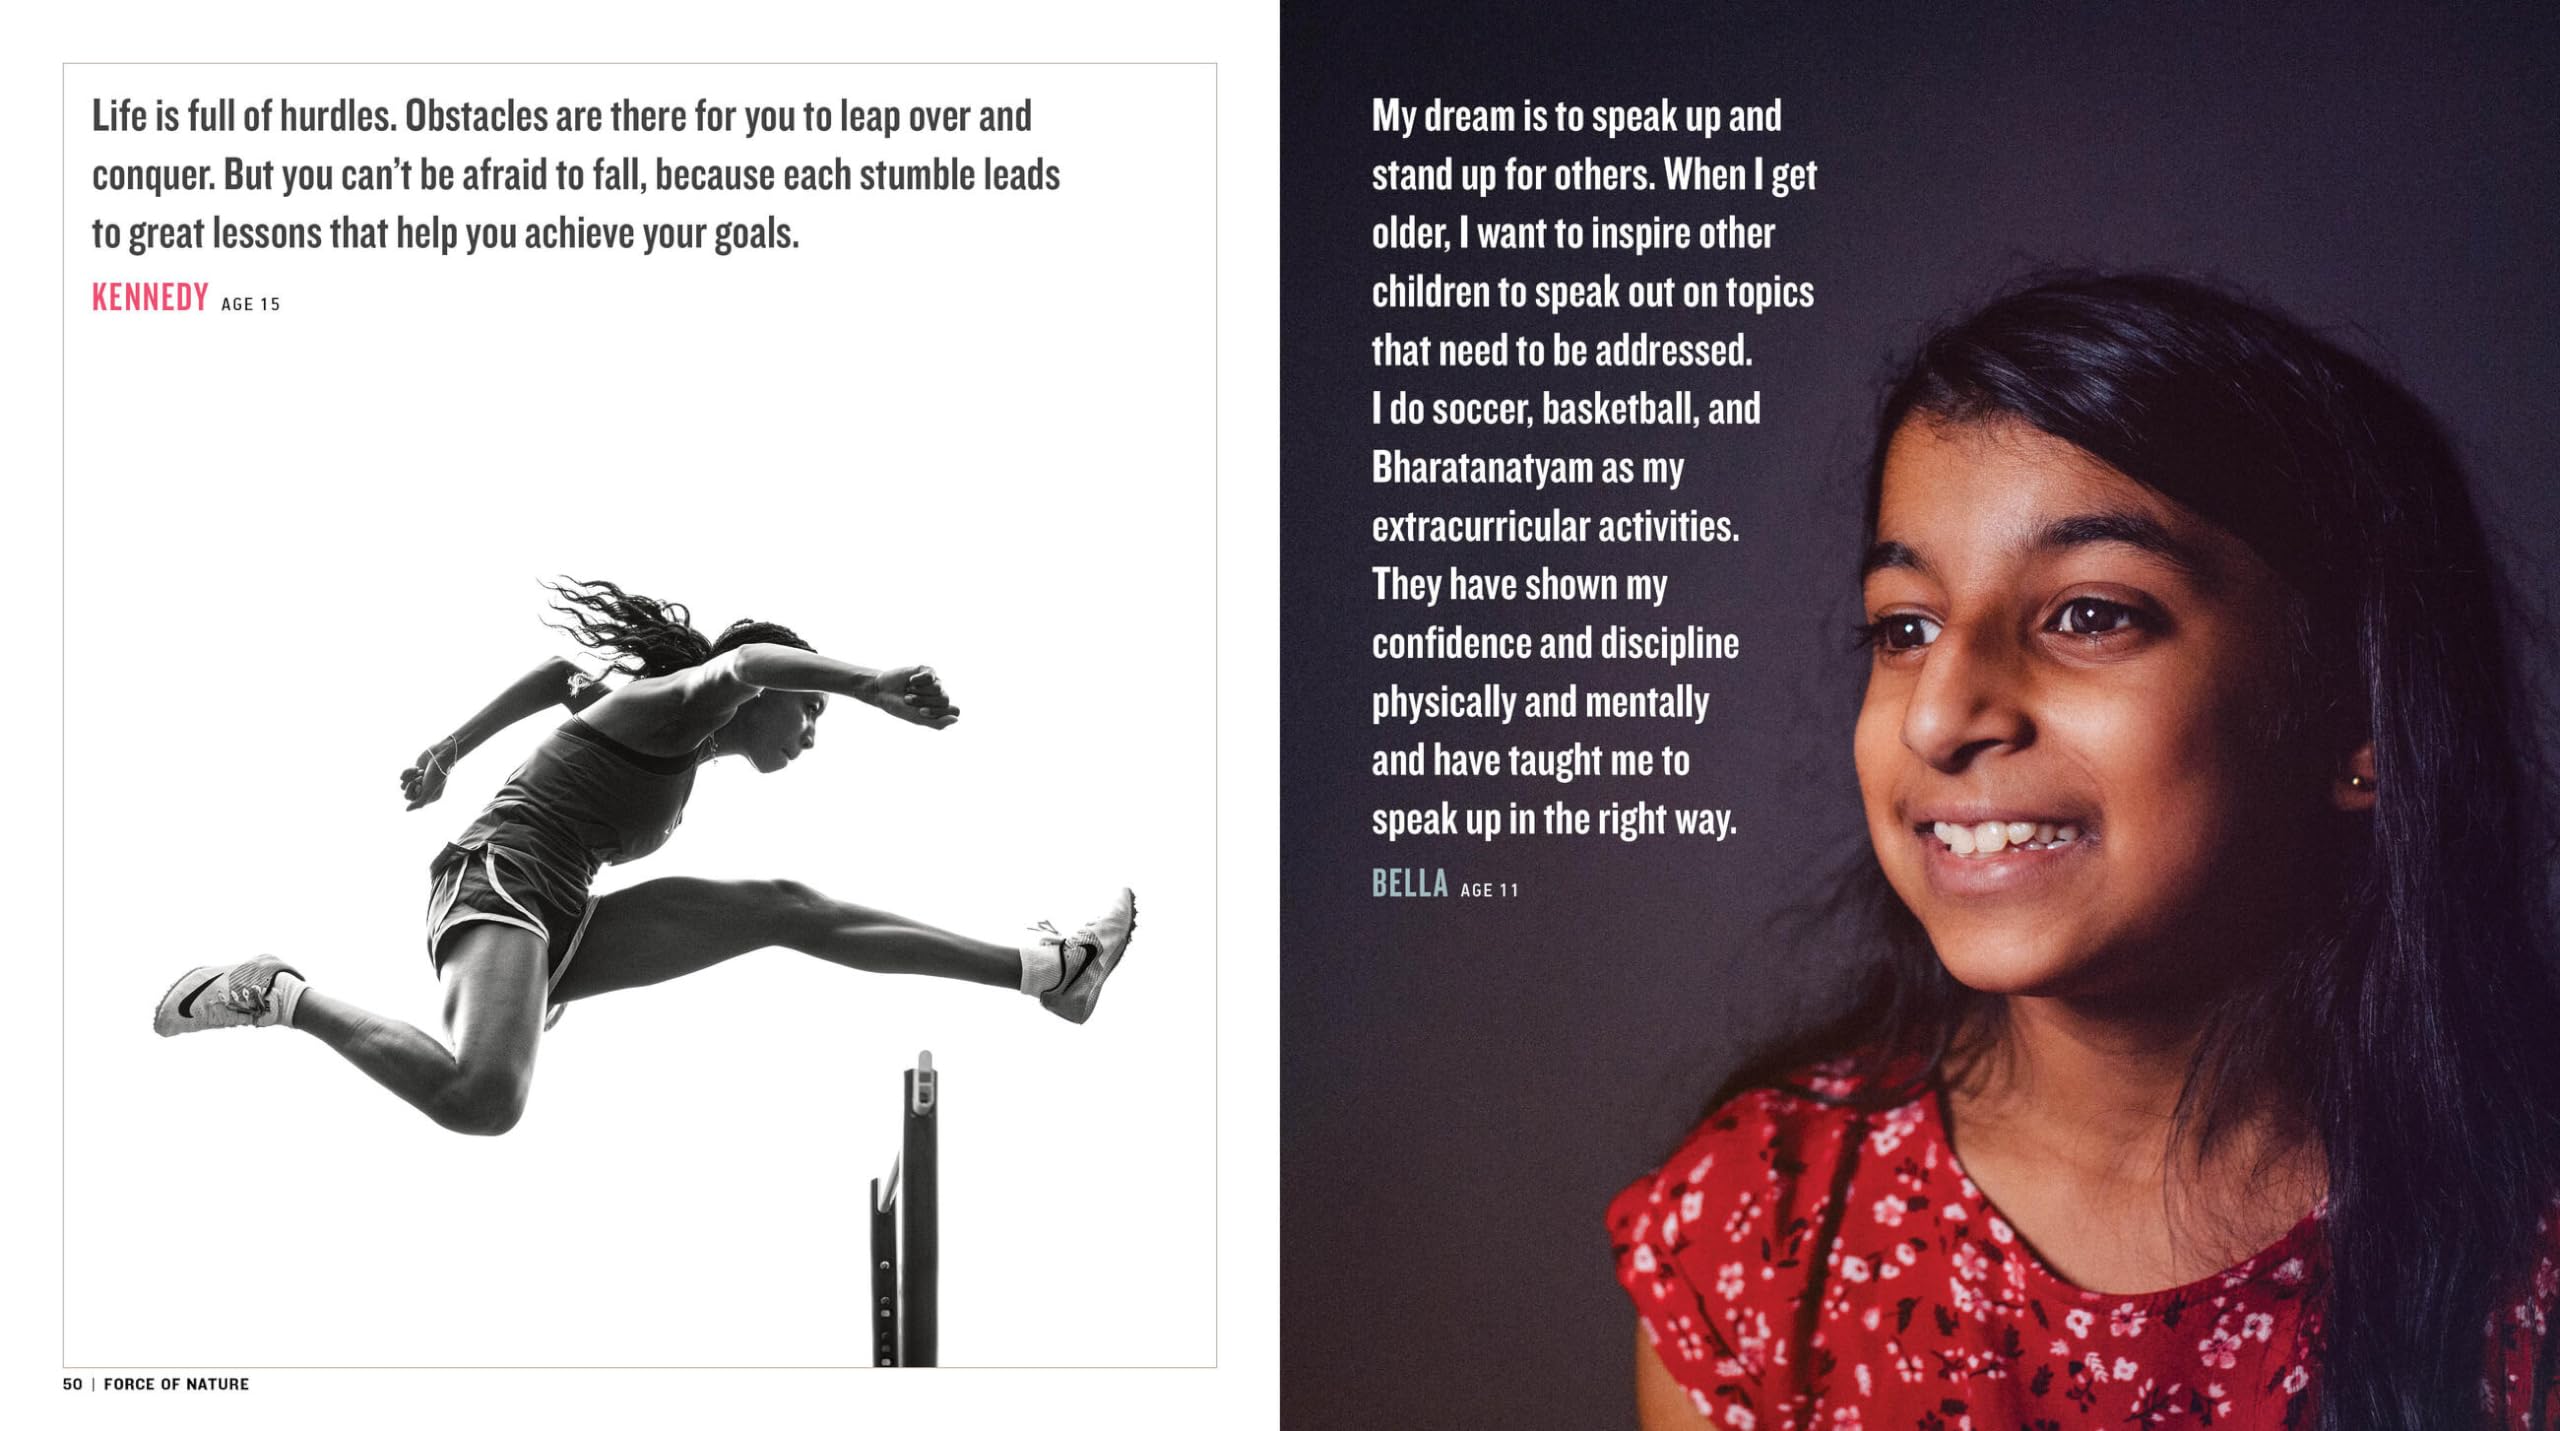 Force of Nature: A Celebration of Girls and Women Raising Their Voices